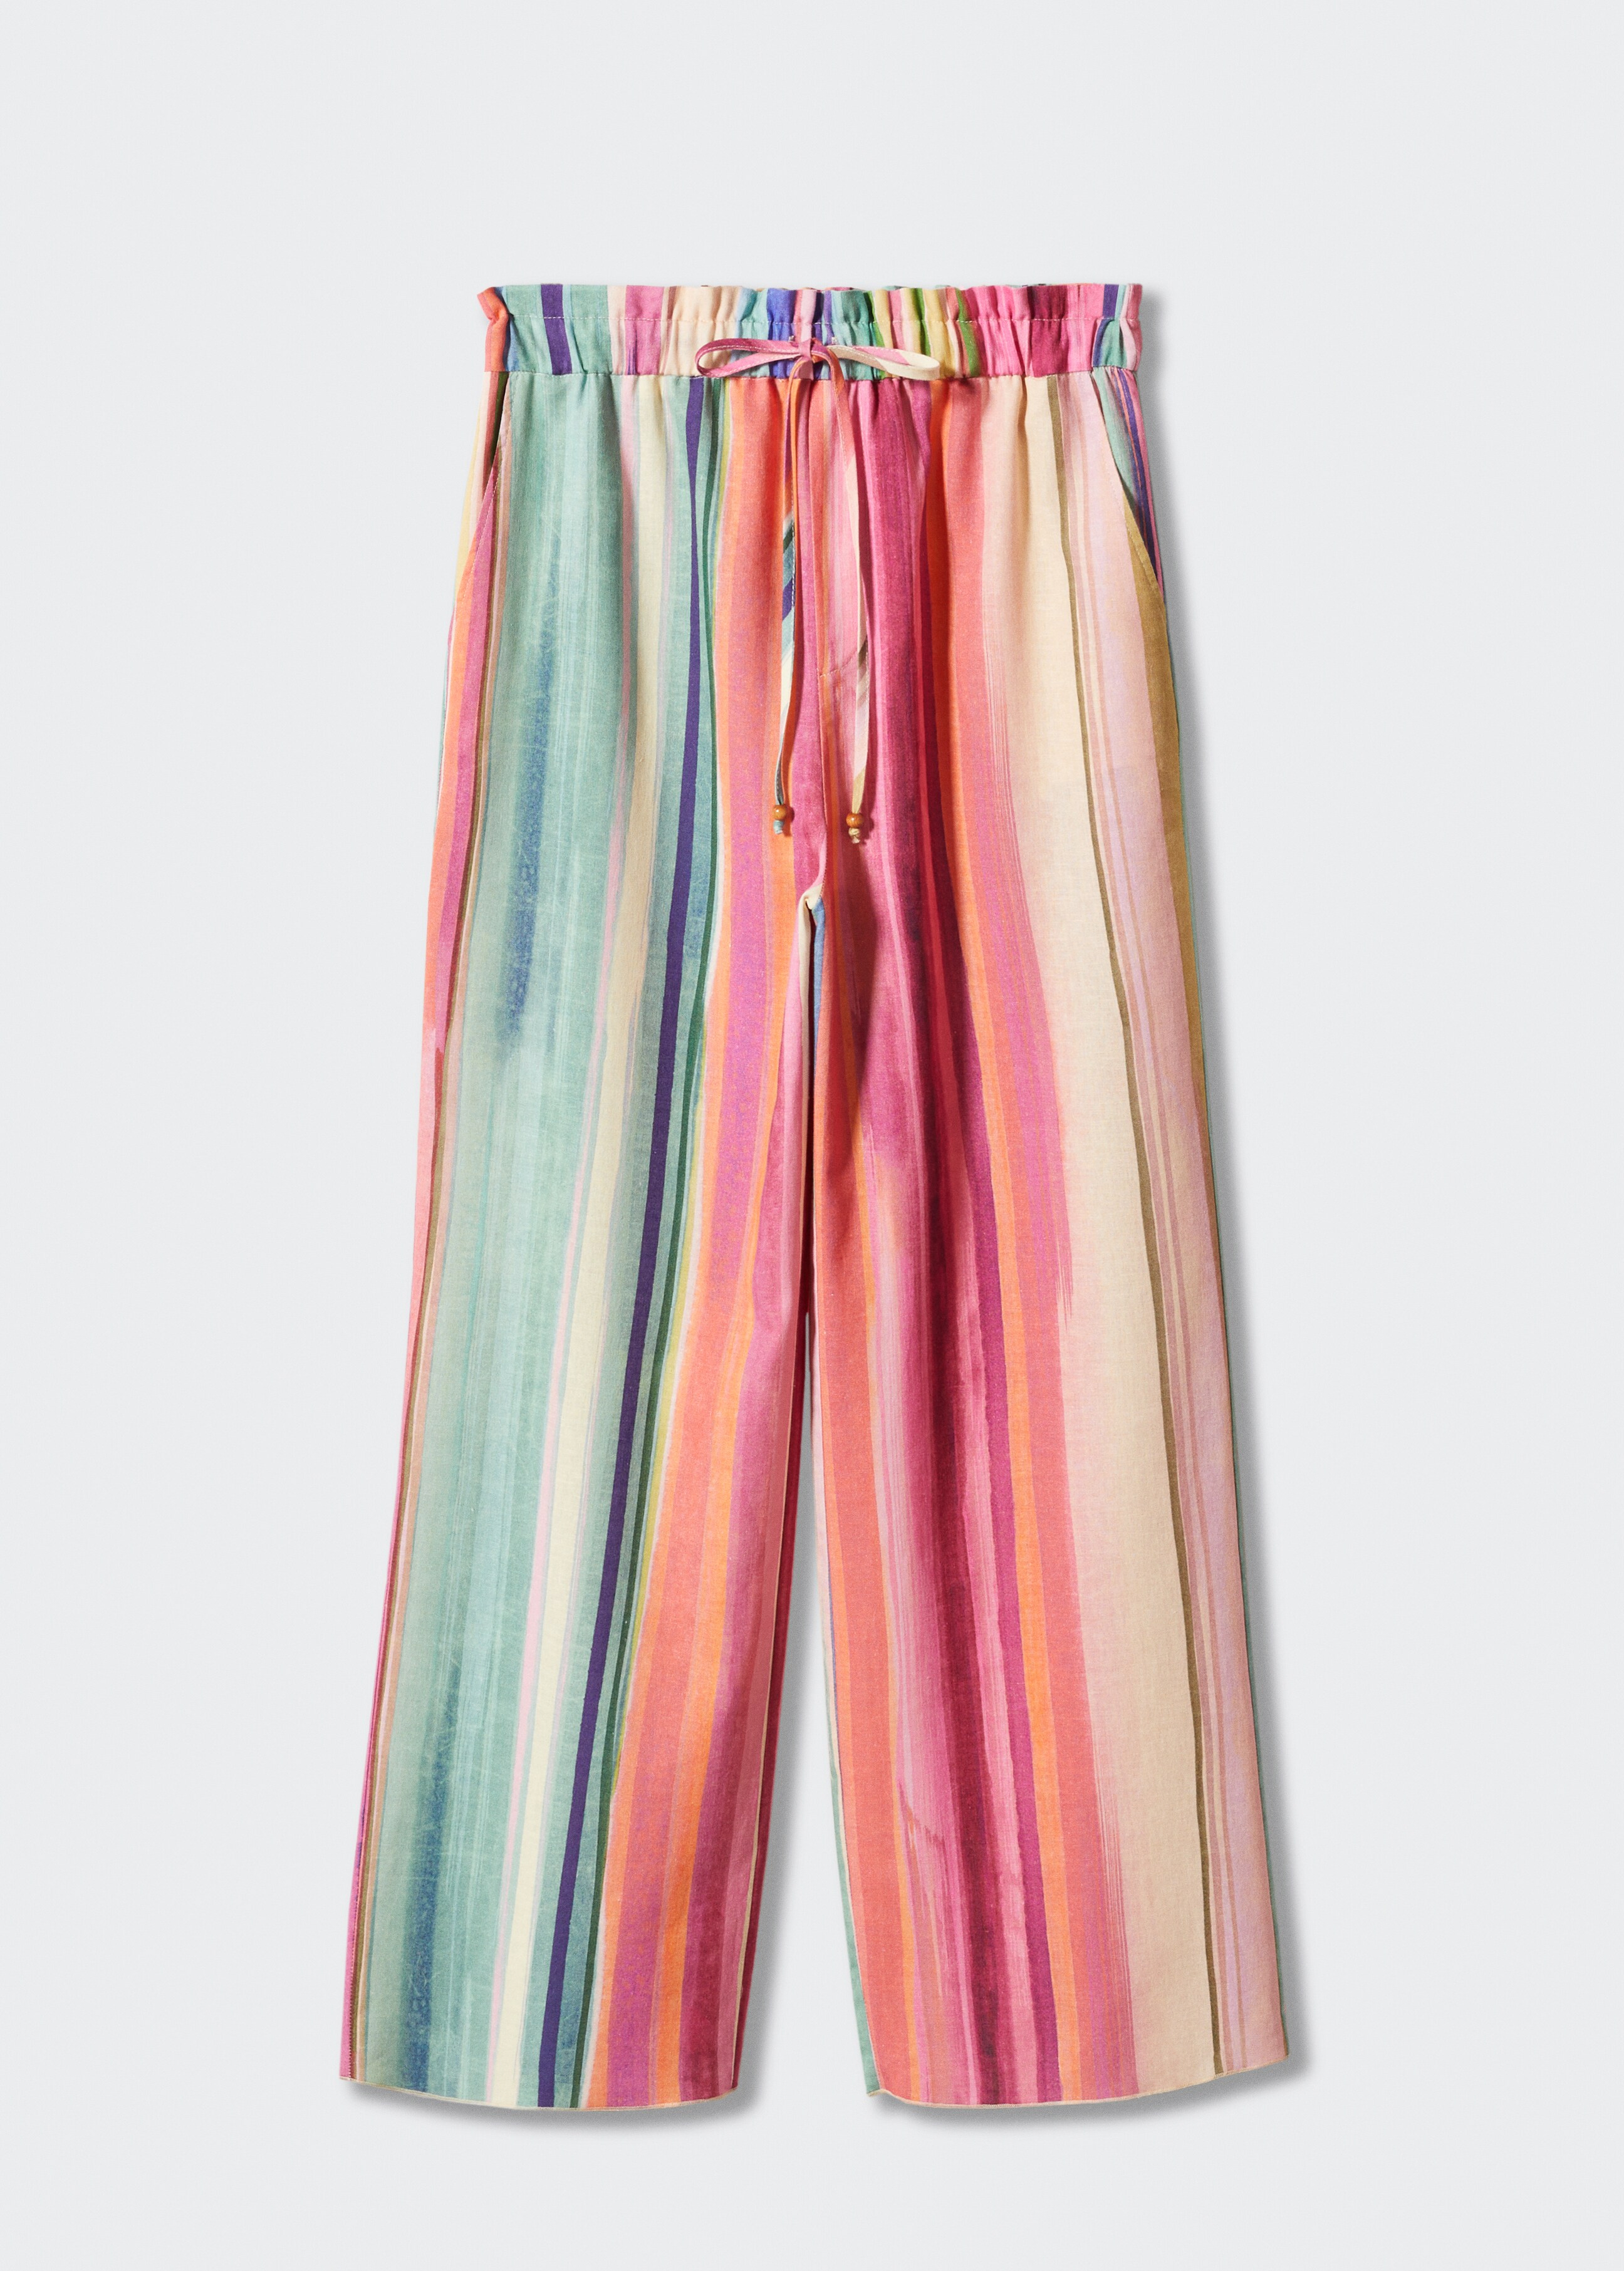 Multi-coloured striped linen trousers - Article without model